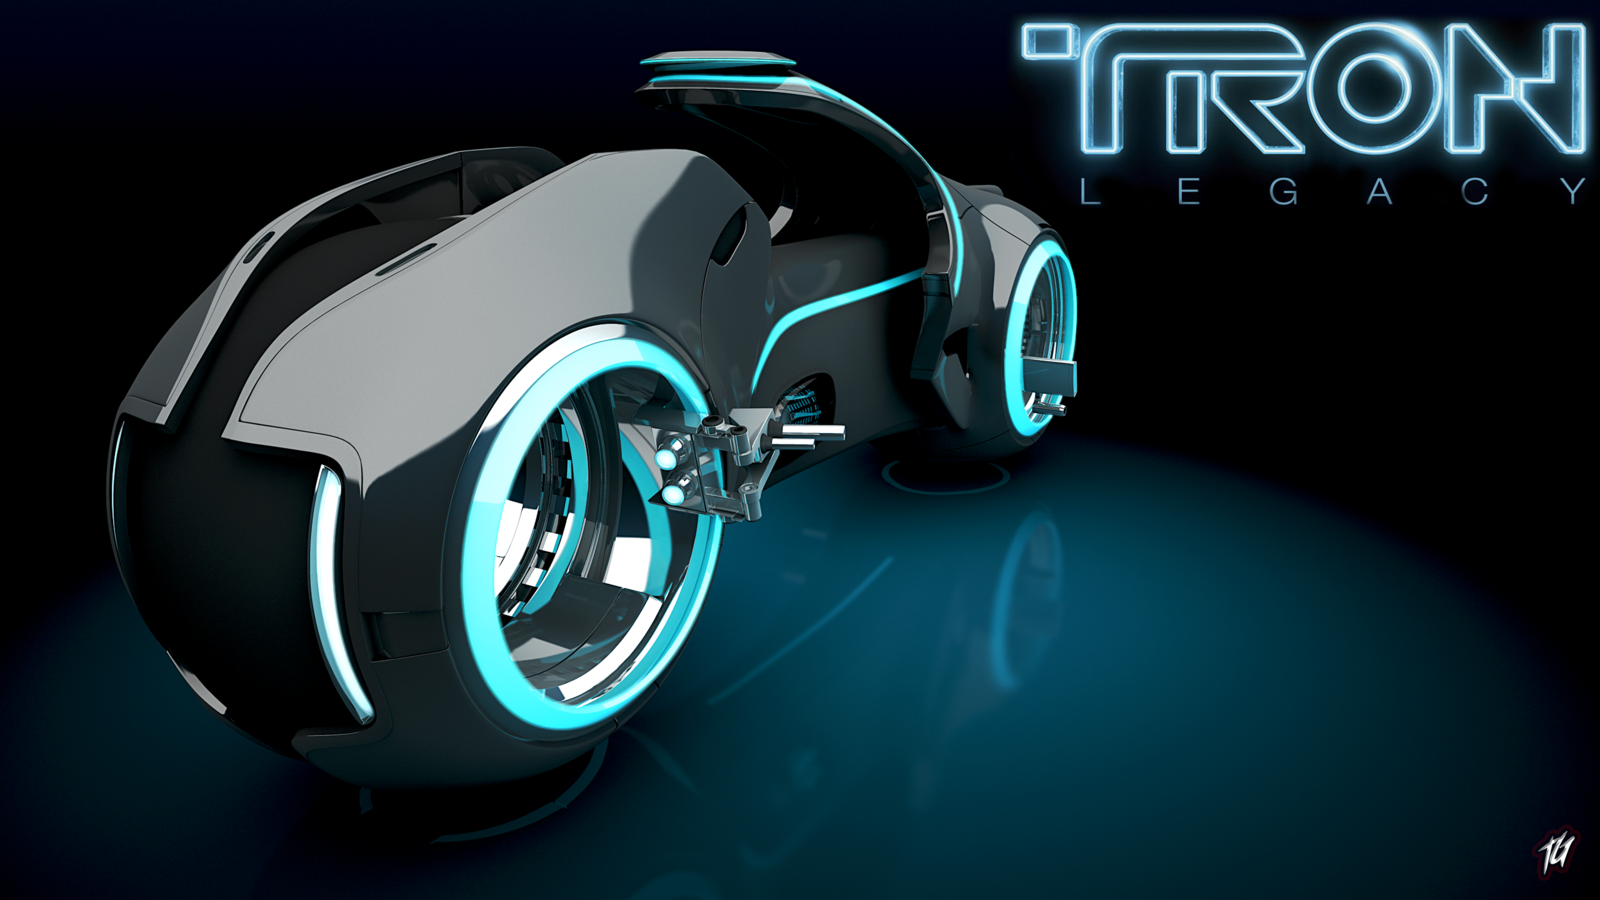 Tron legacy light cycle by StupifY61 on DeviantArt